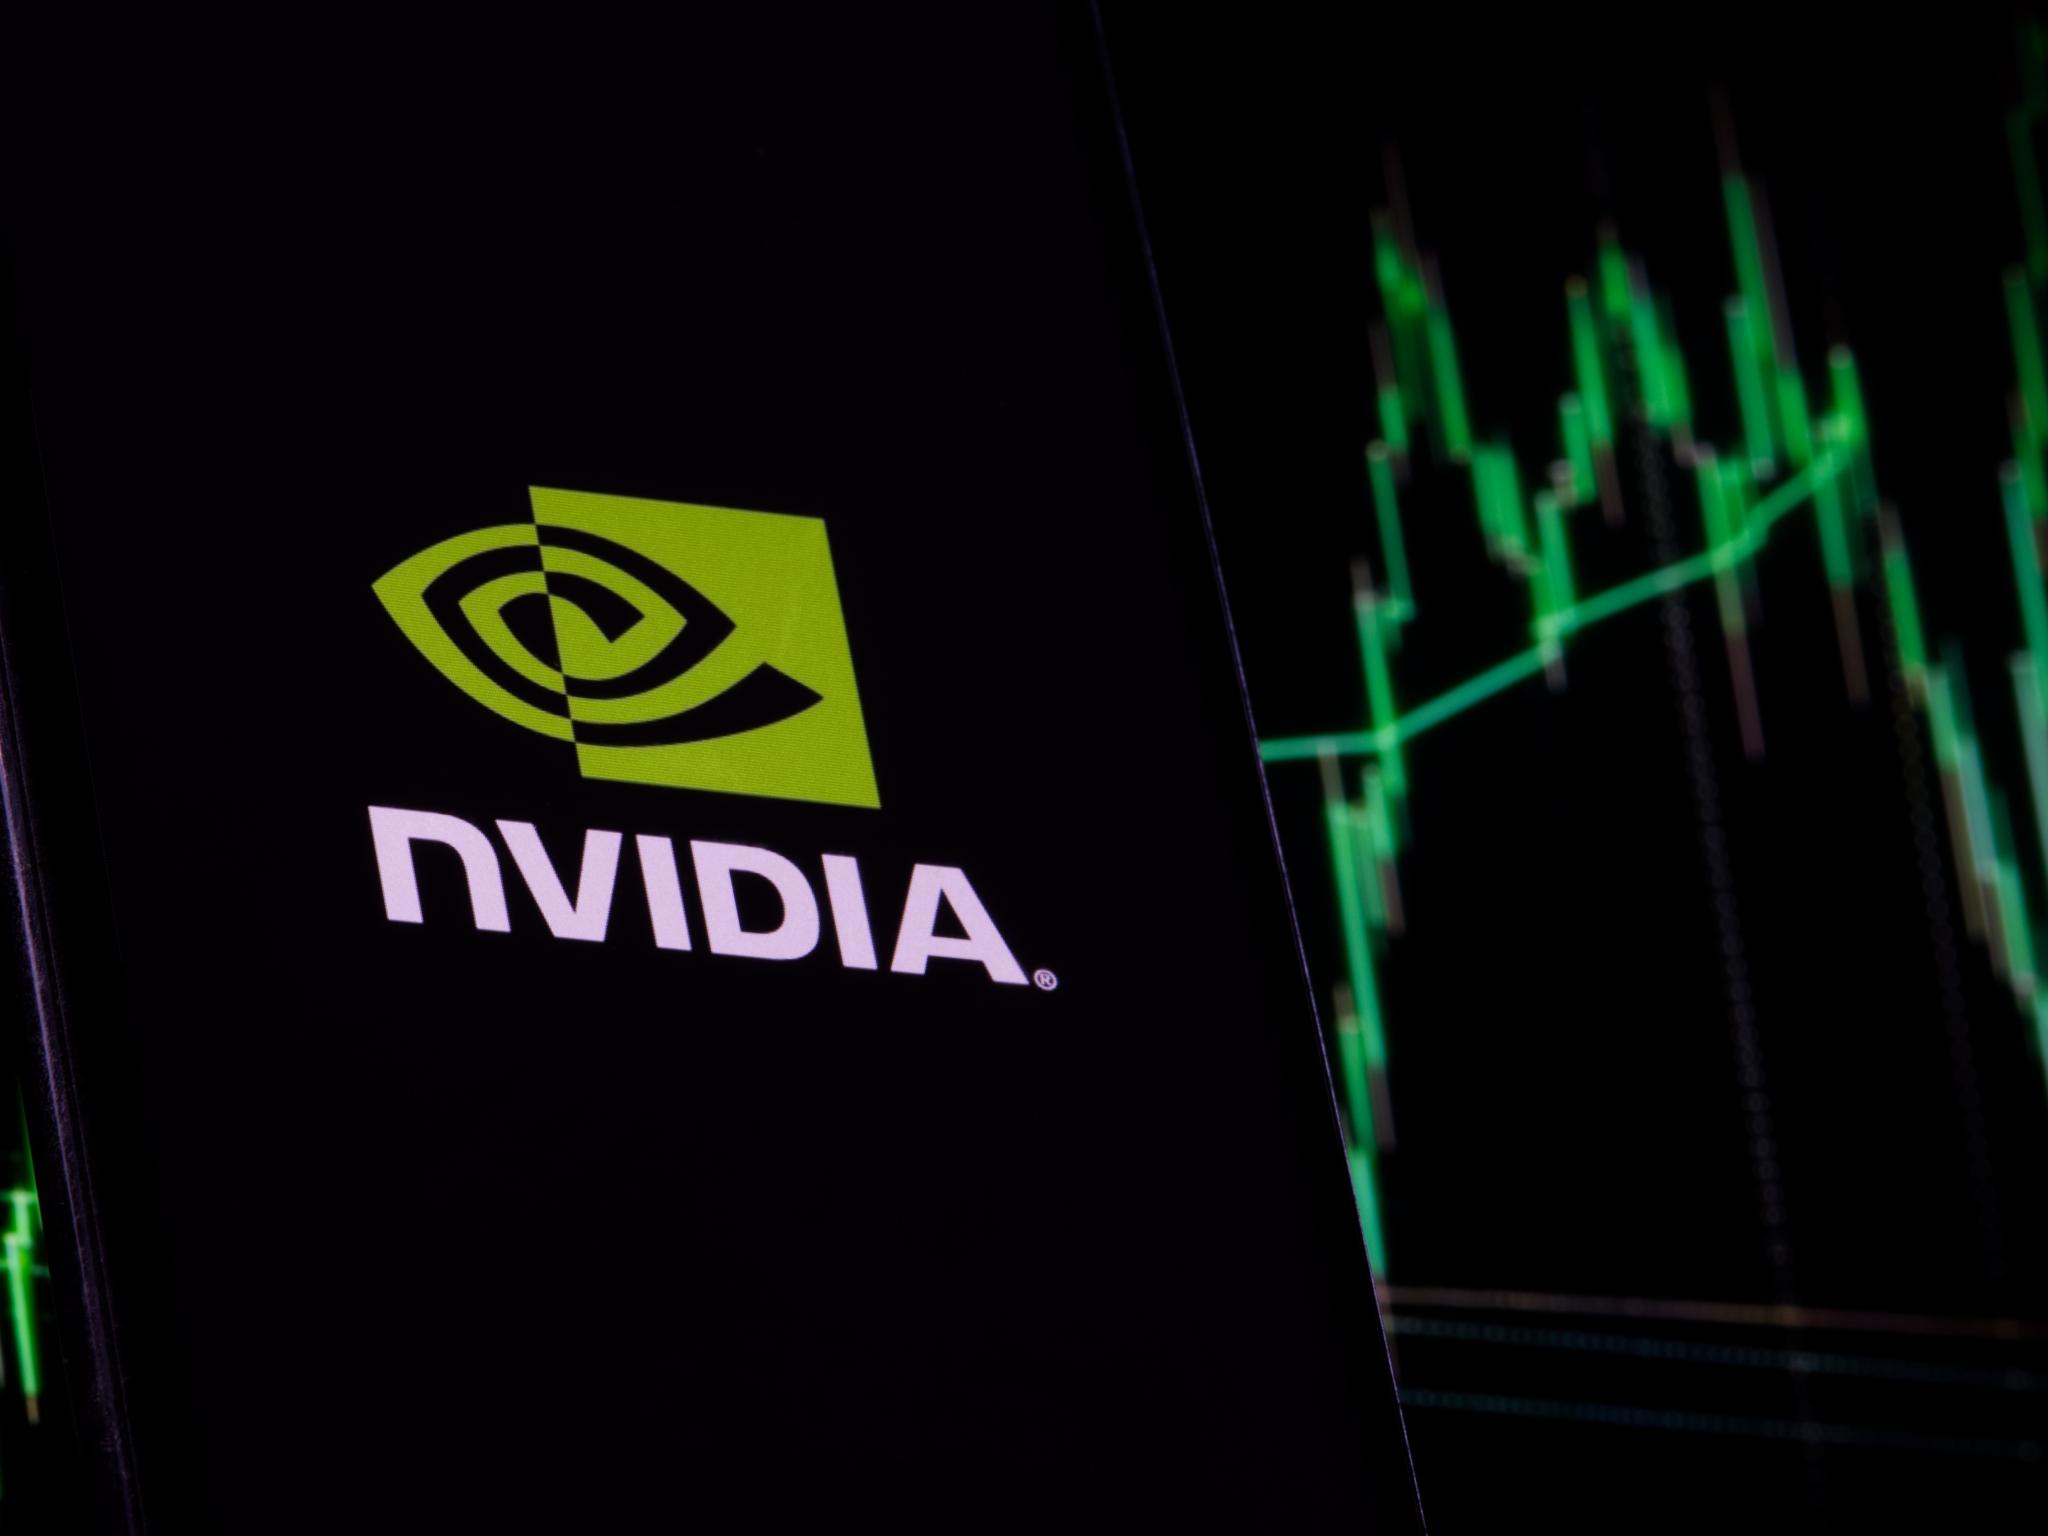  jim-cramer-isnt-going-with-this-tech-company-its-complicated-im-a-nvidia-guy 